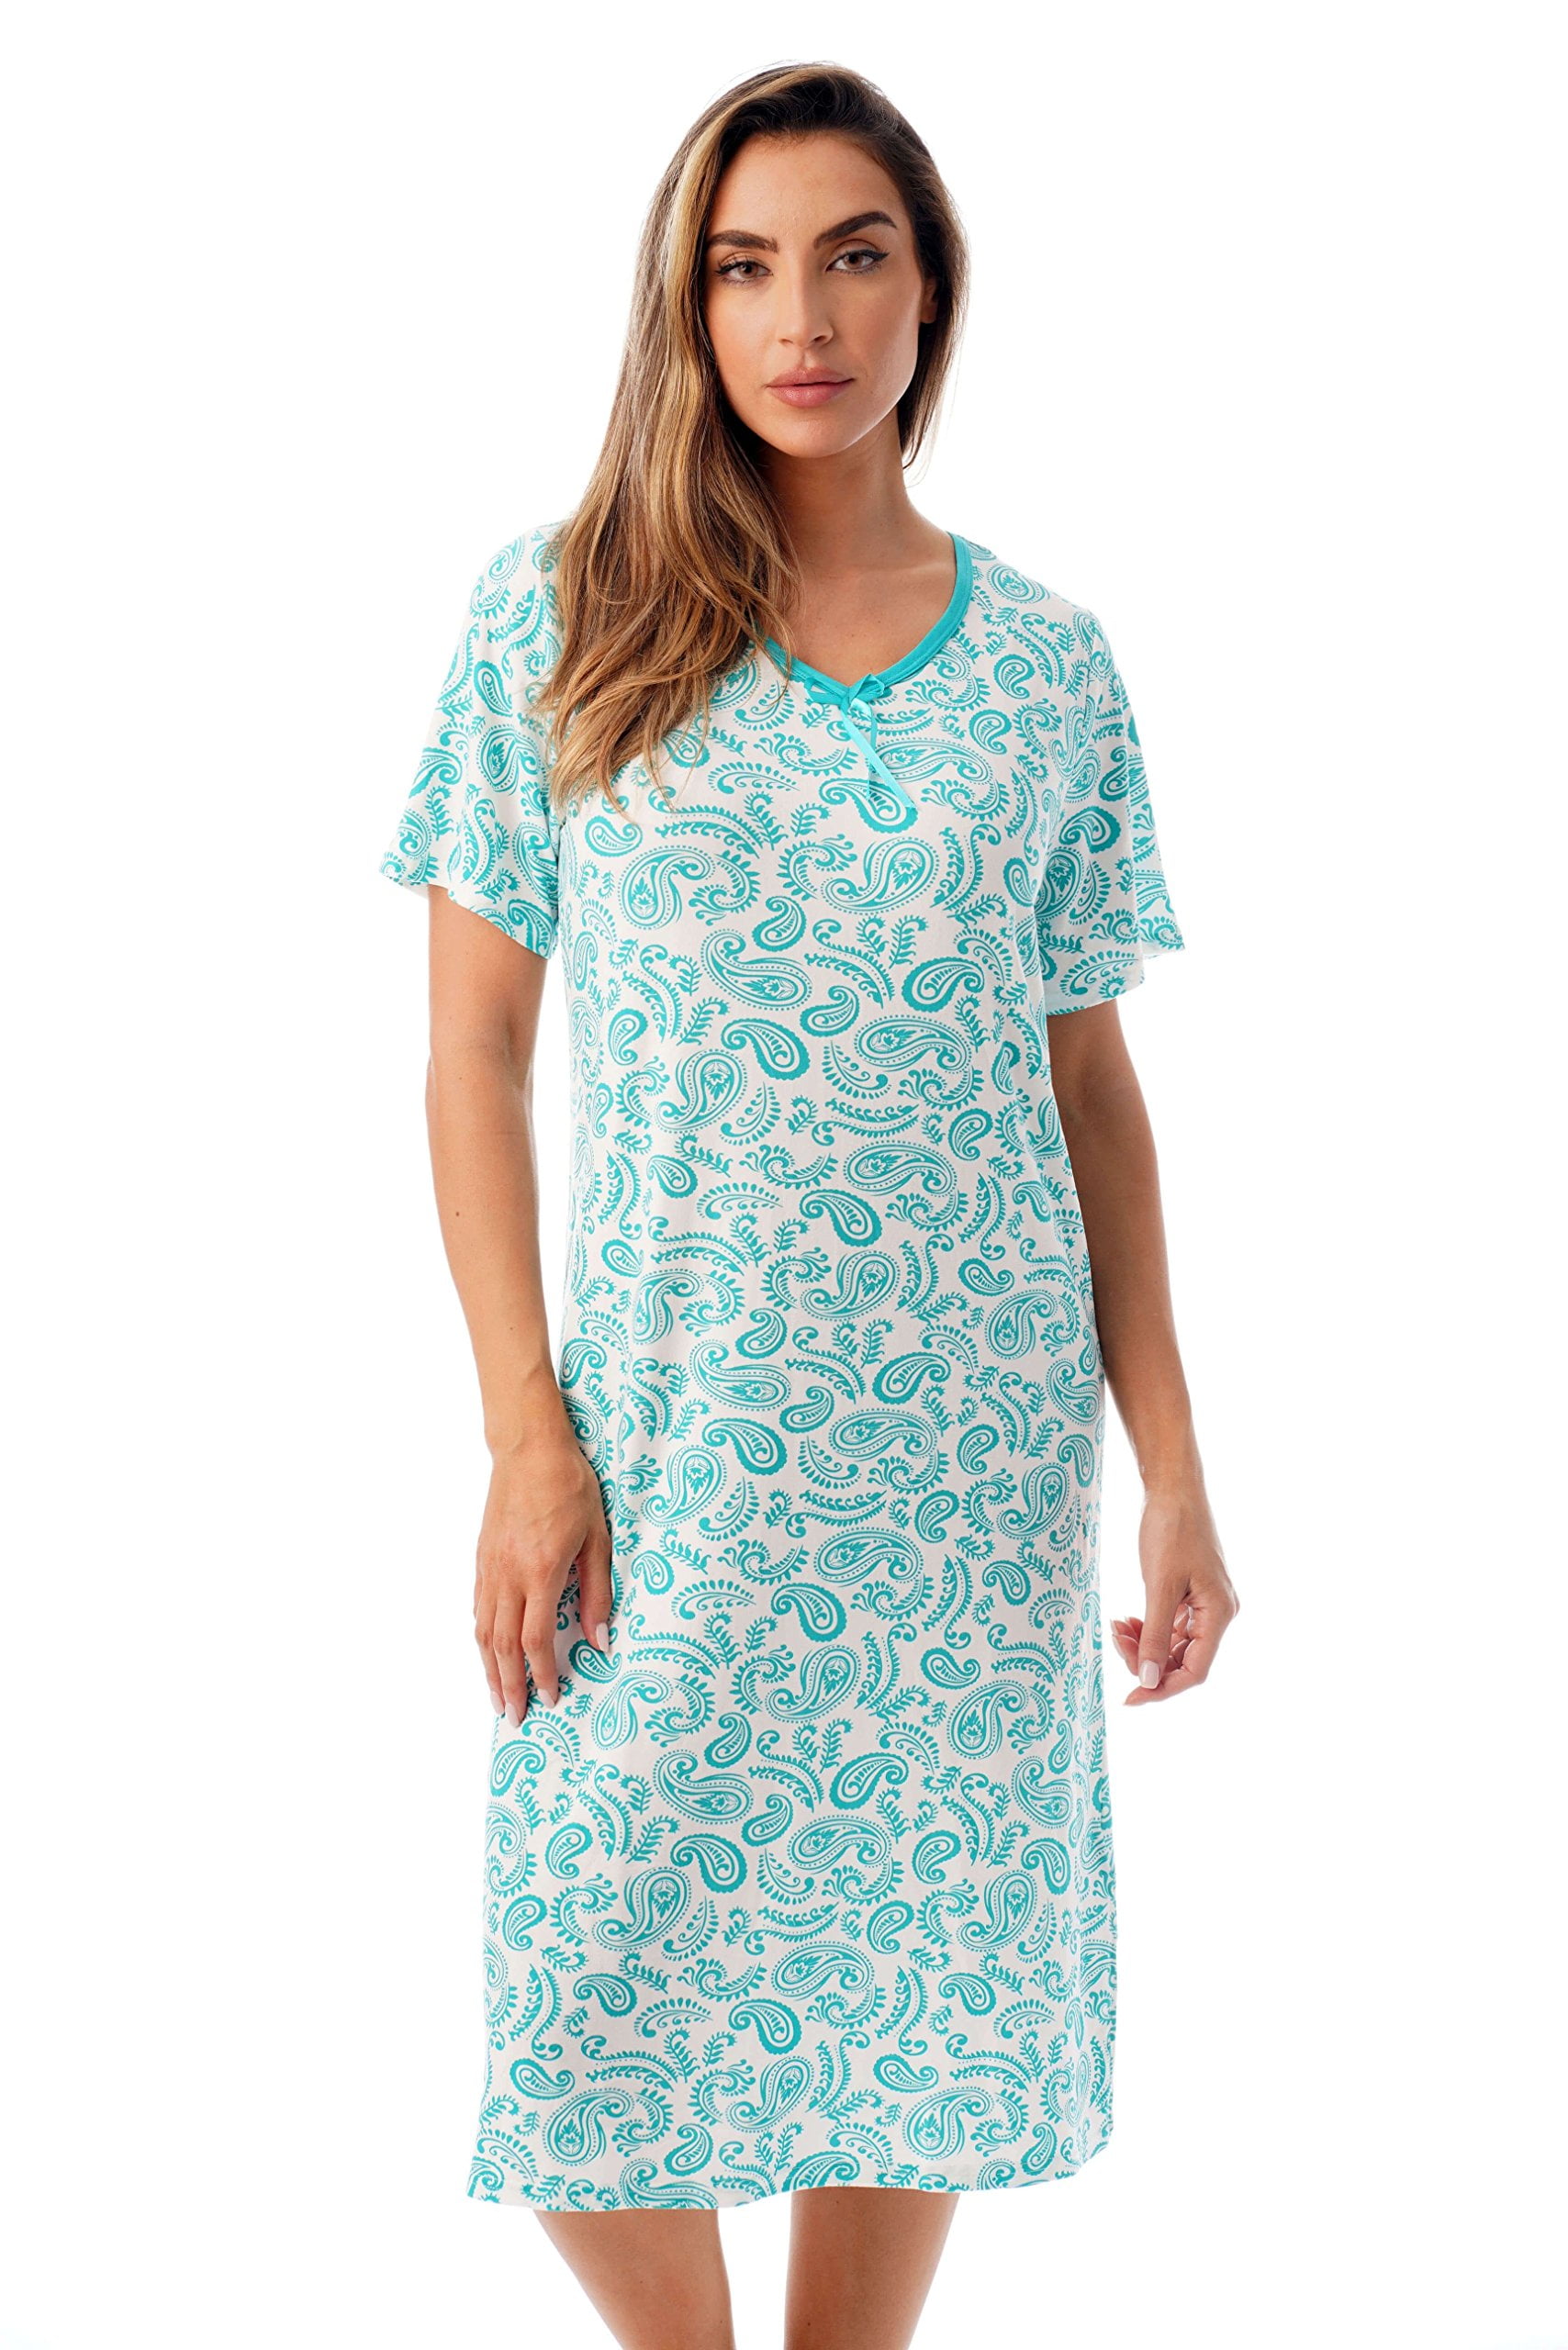 Just Love Women's Nightgown Sleep Dress - Soft and Comfortable Short ...